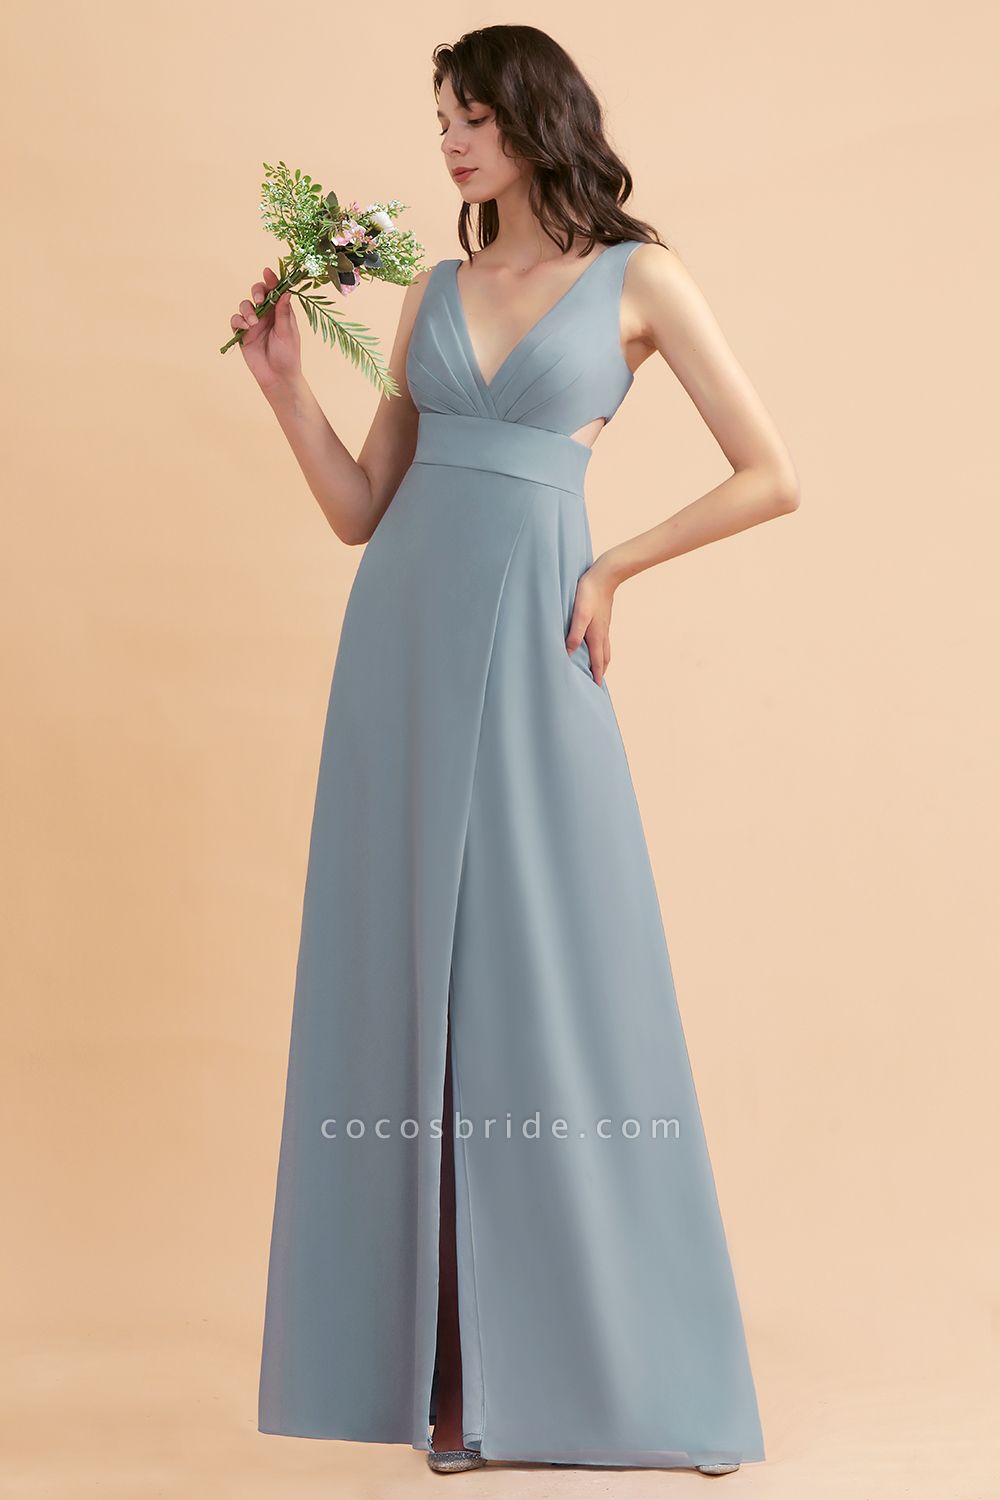 Simple V-neck A-Line Wide Straps Floor-length Chiffon Bridesmaid Dress With Side Slit